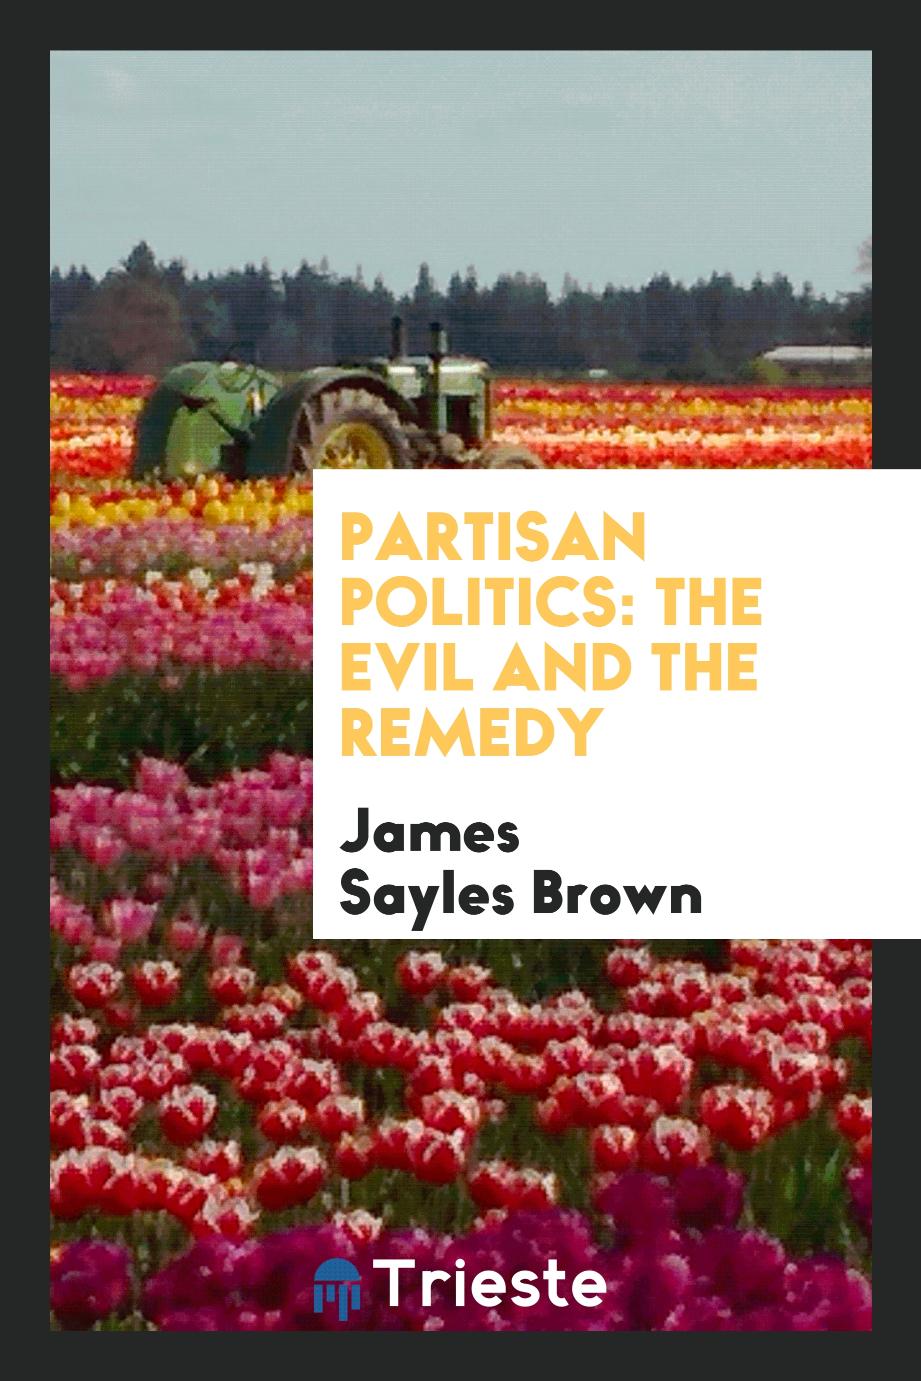 Partisan politics: the evil and the remedy